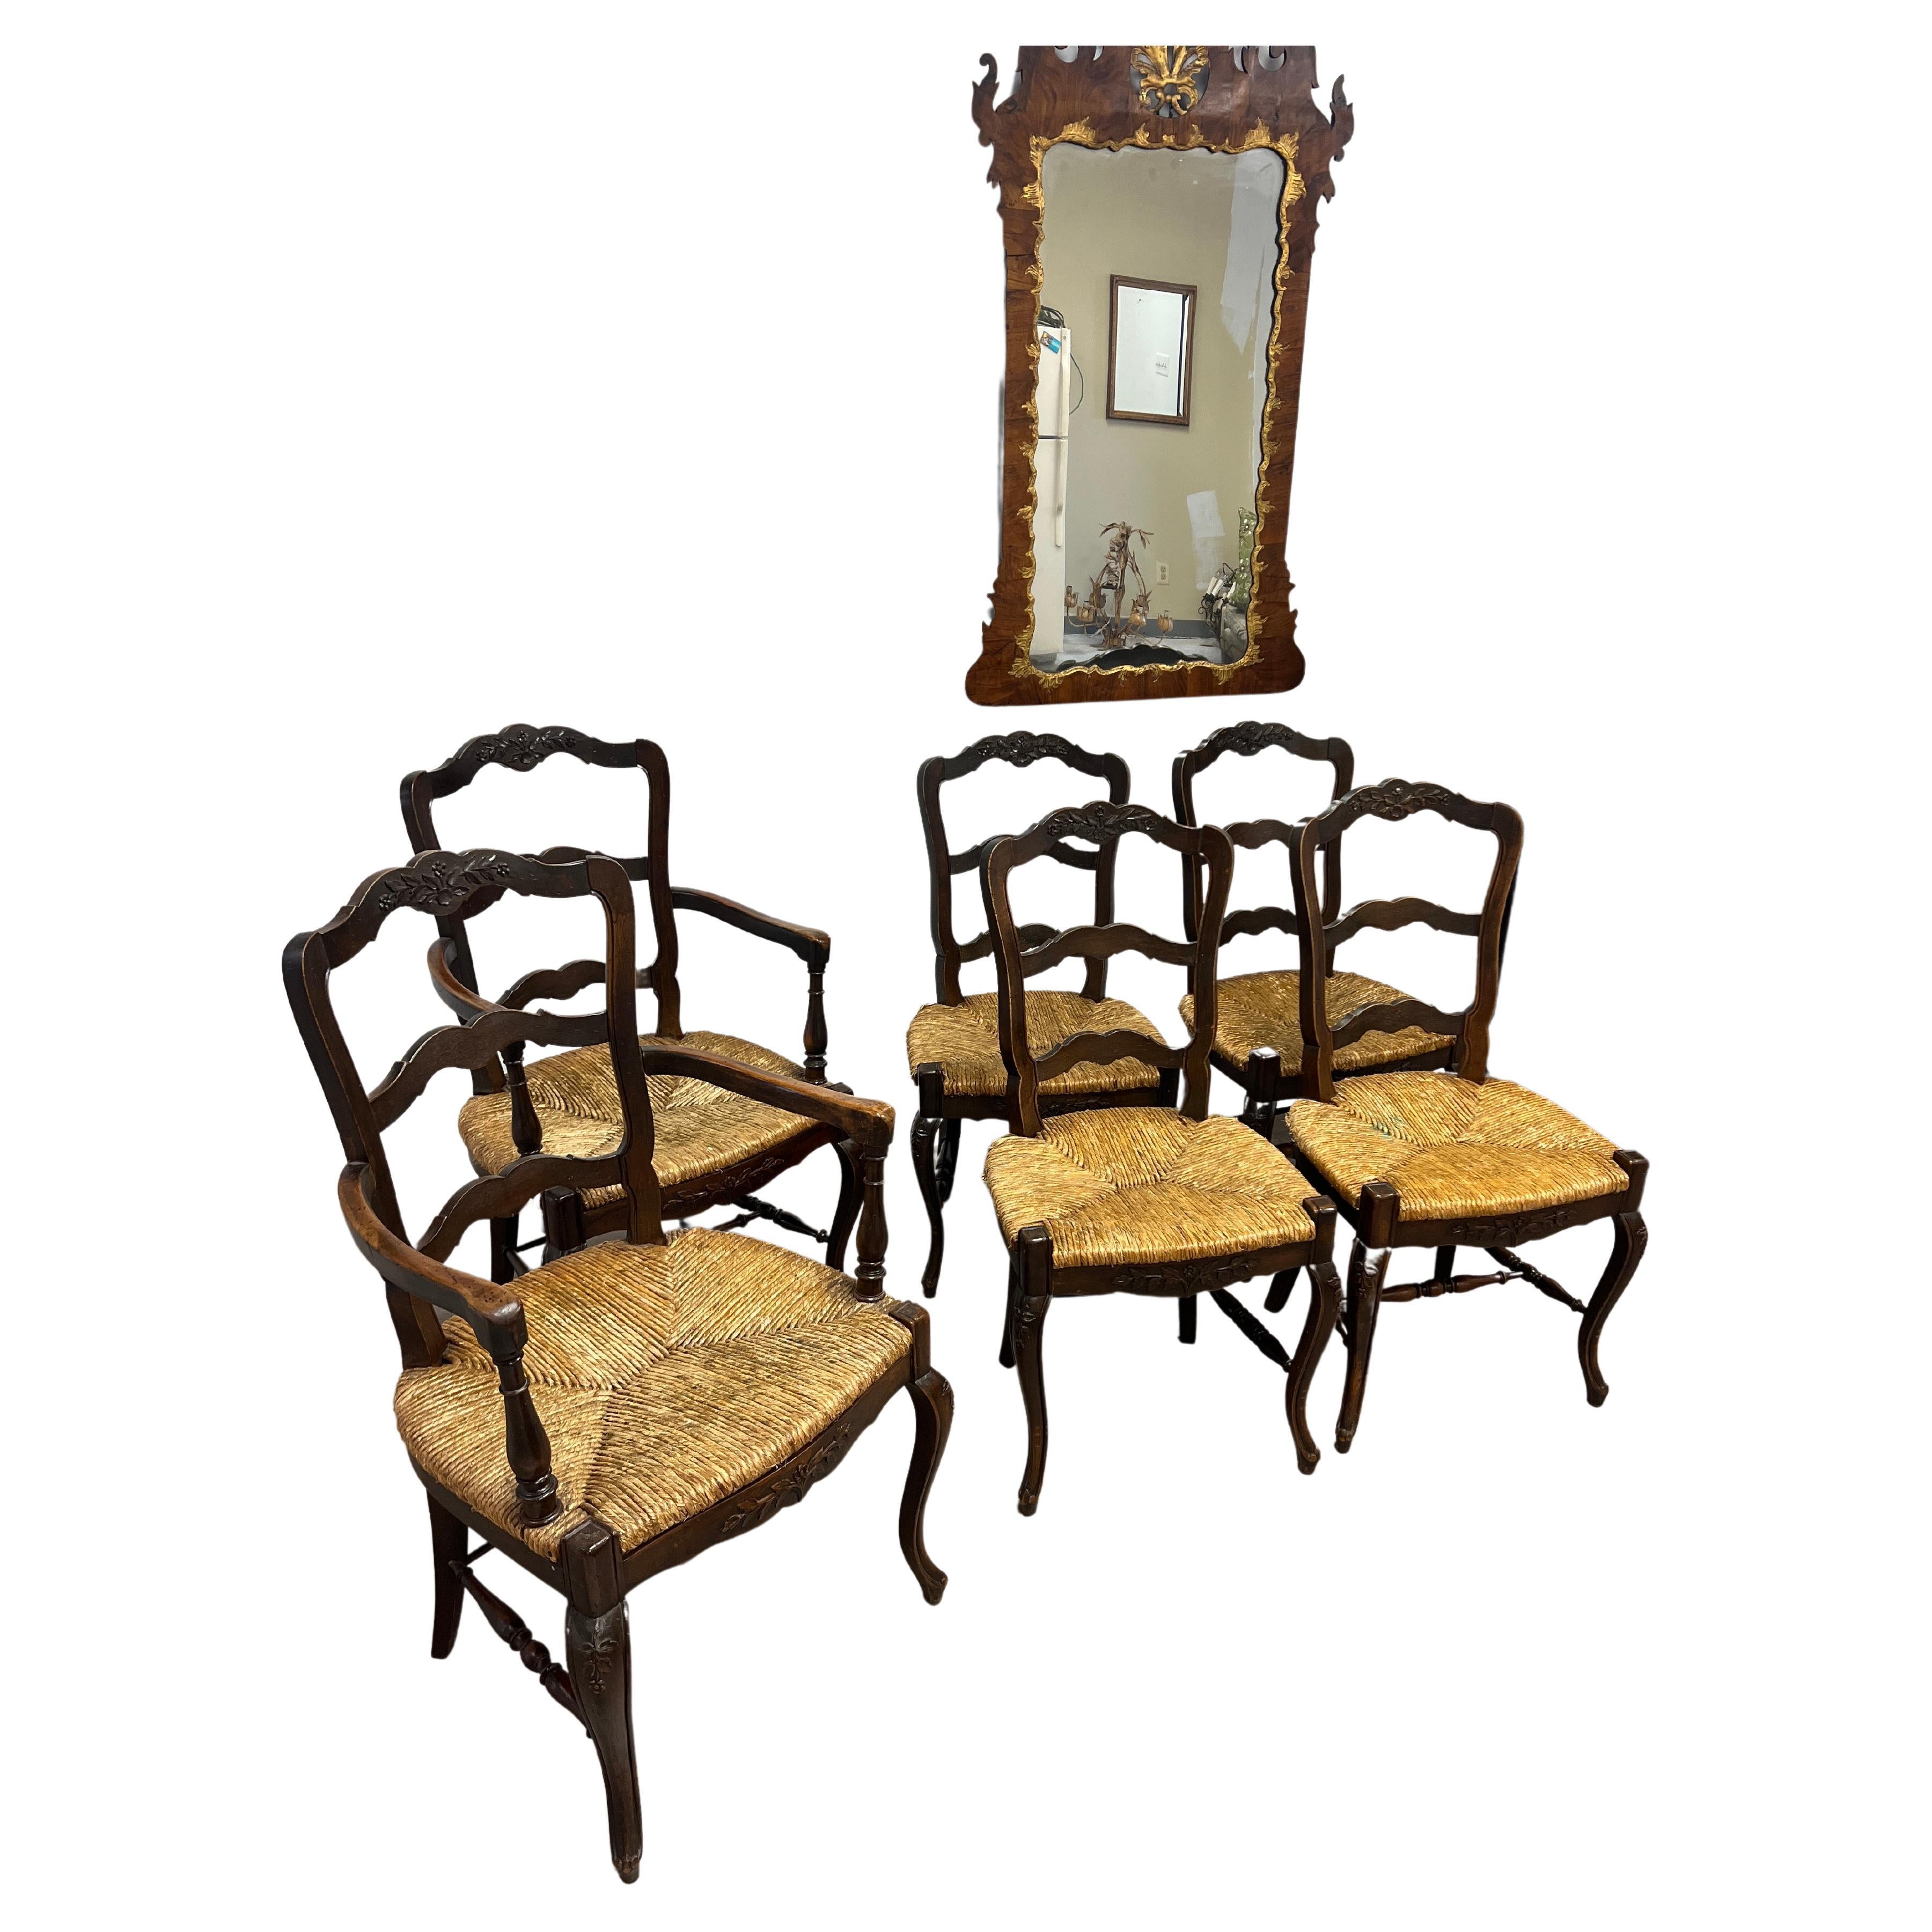 Featuring a handsome set of six French Provincial chairs. The set includes two armchairs measuring 38